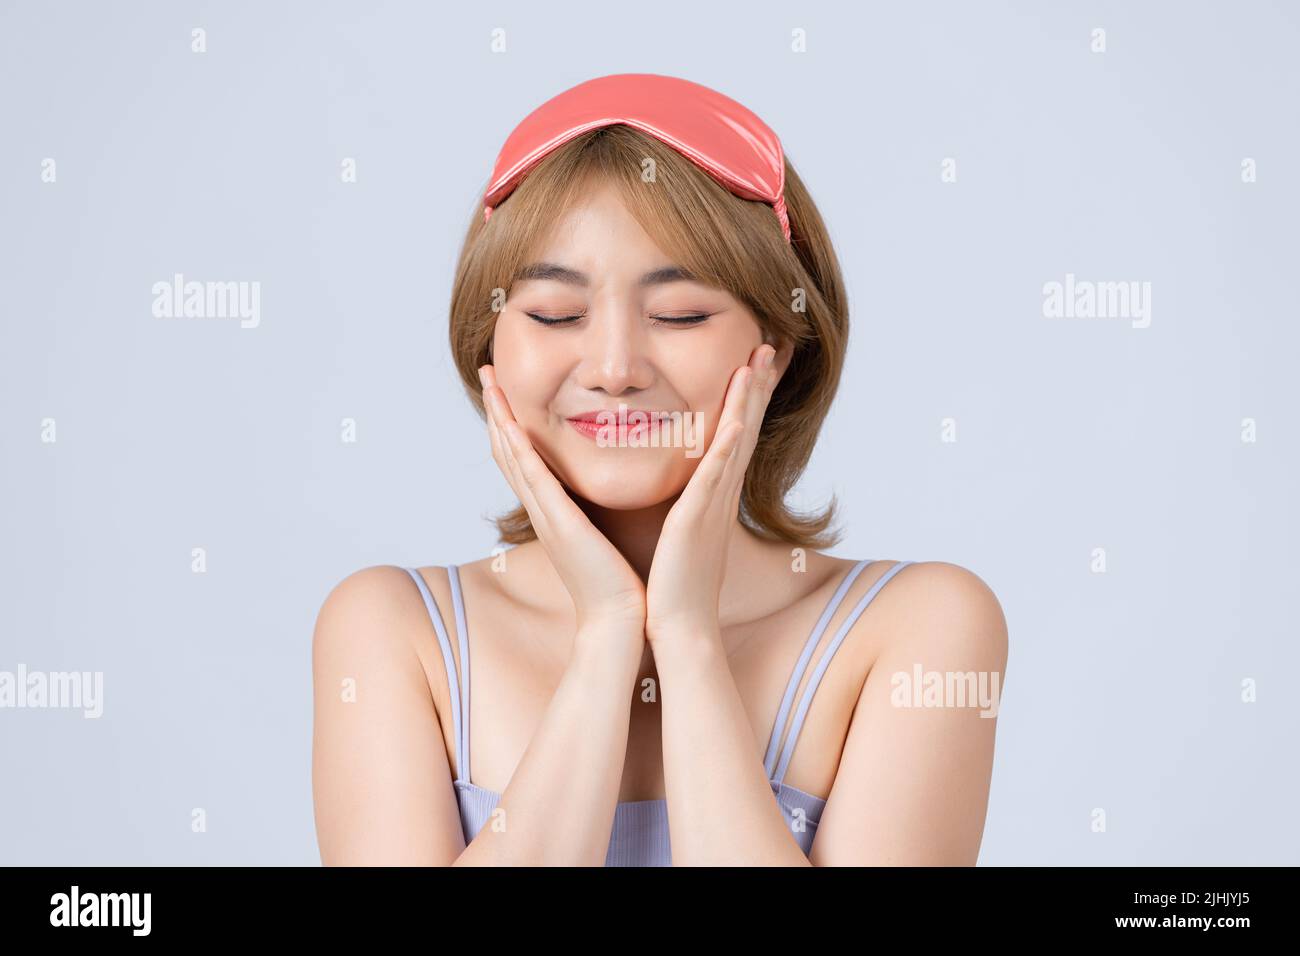 Smiling young woman with closed eyes wake up concept. Stock Photo